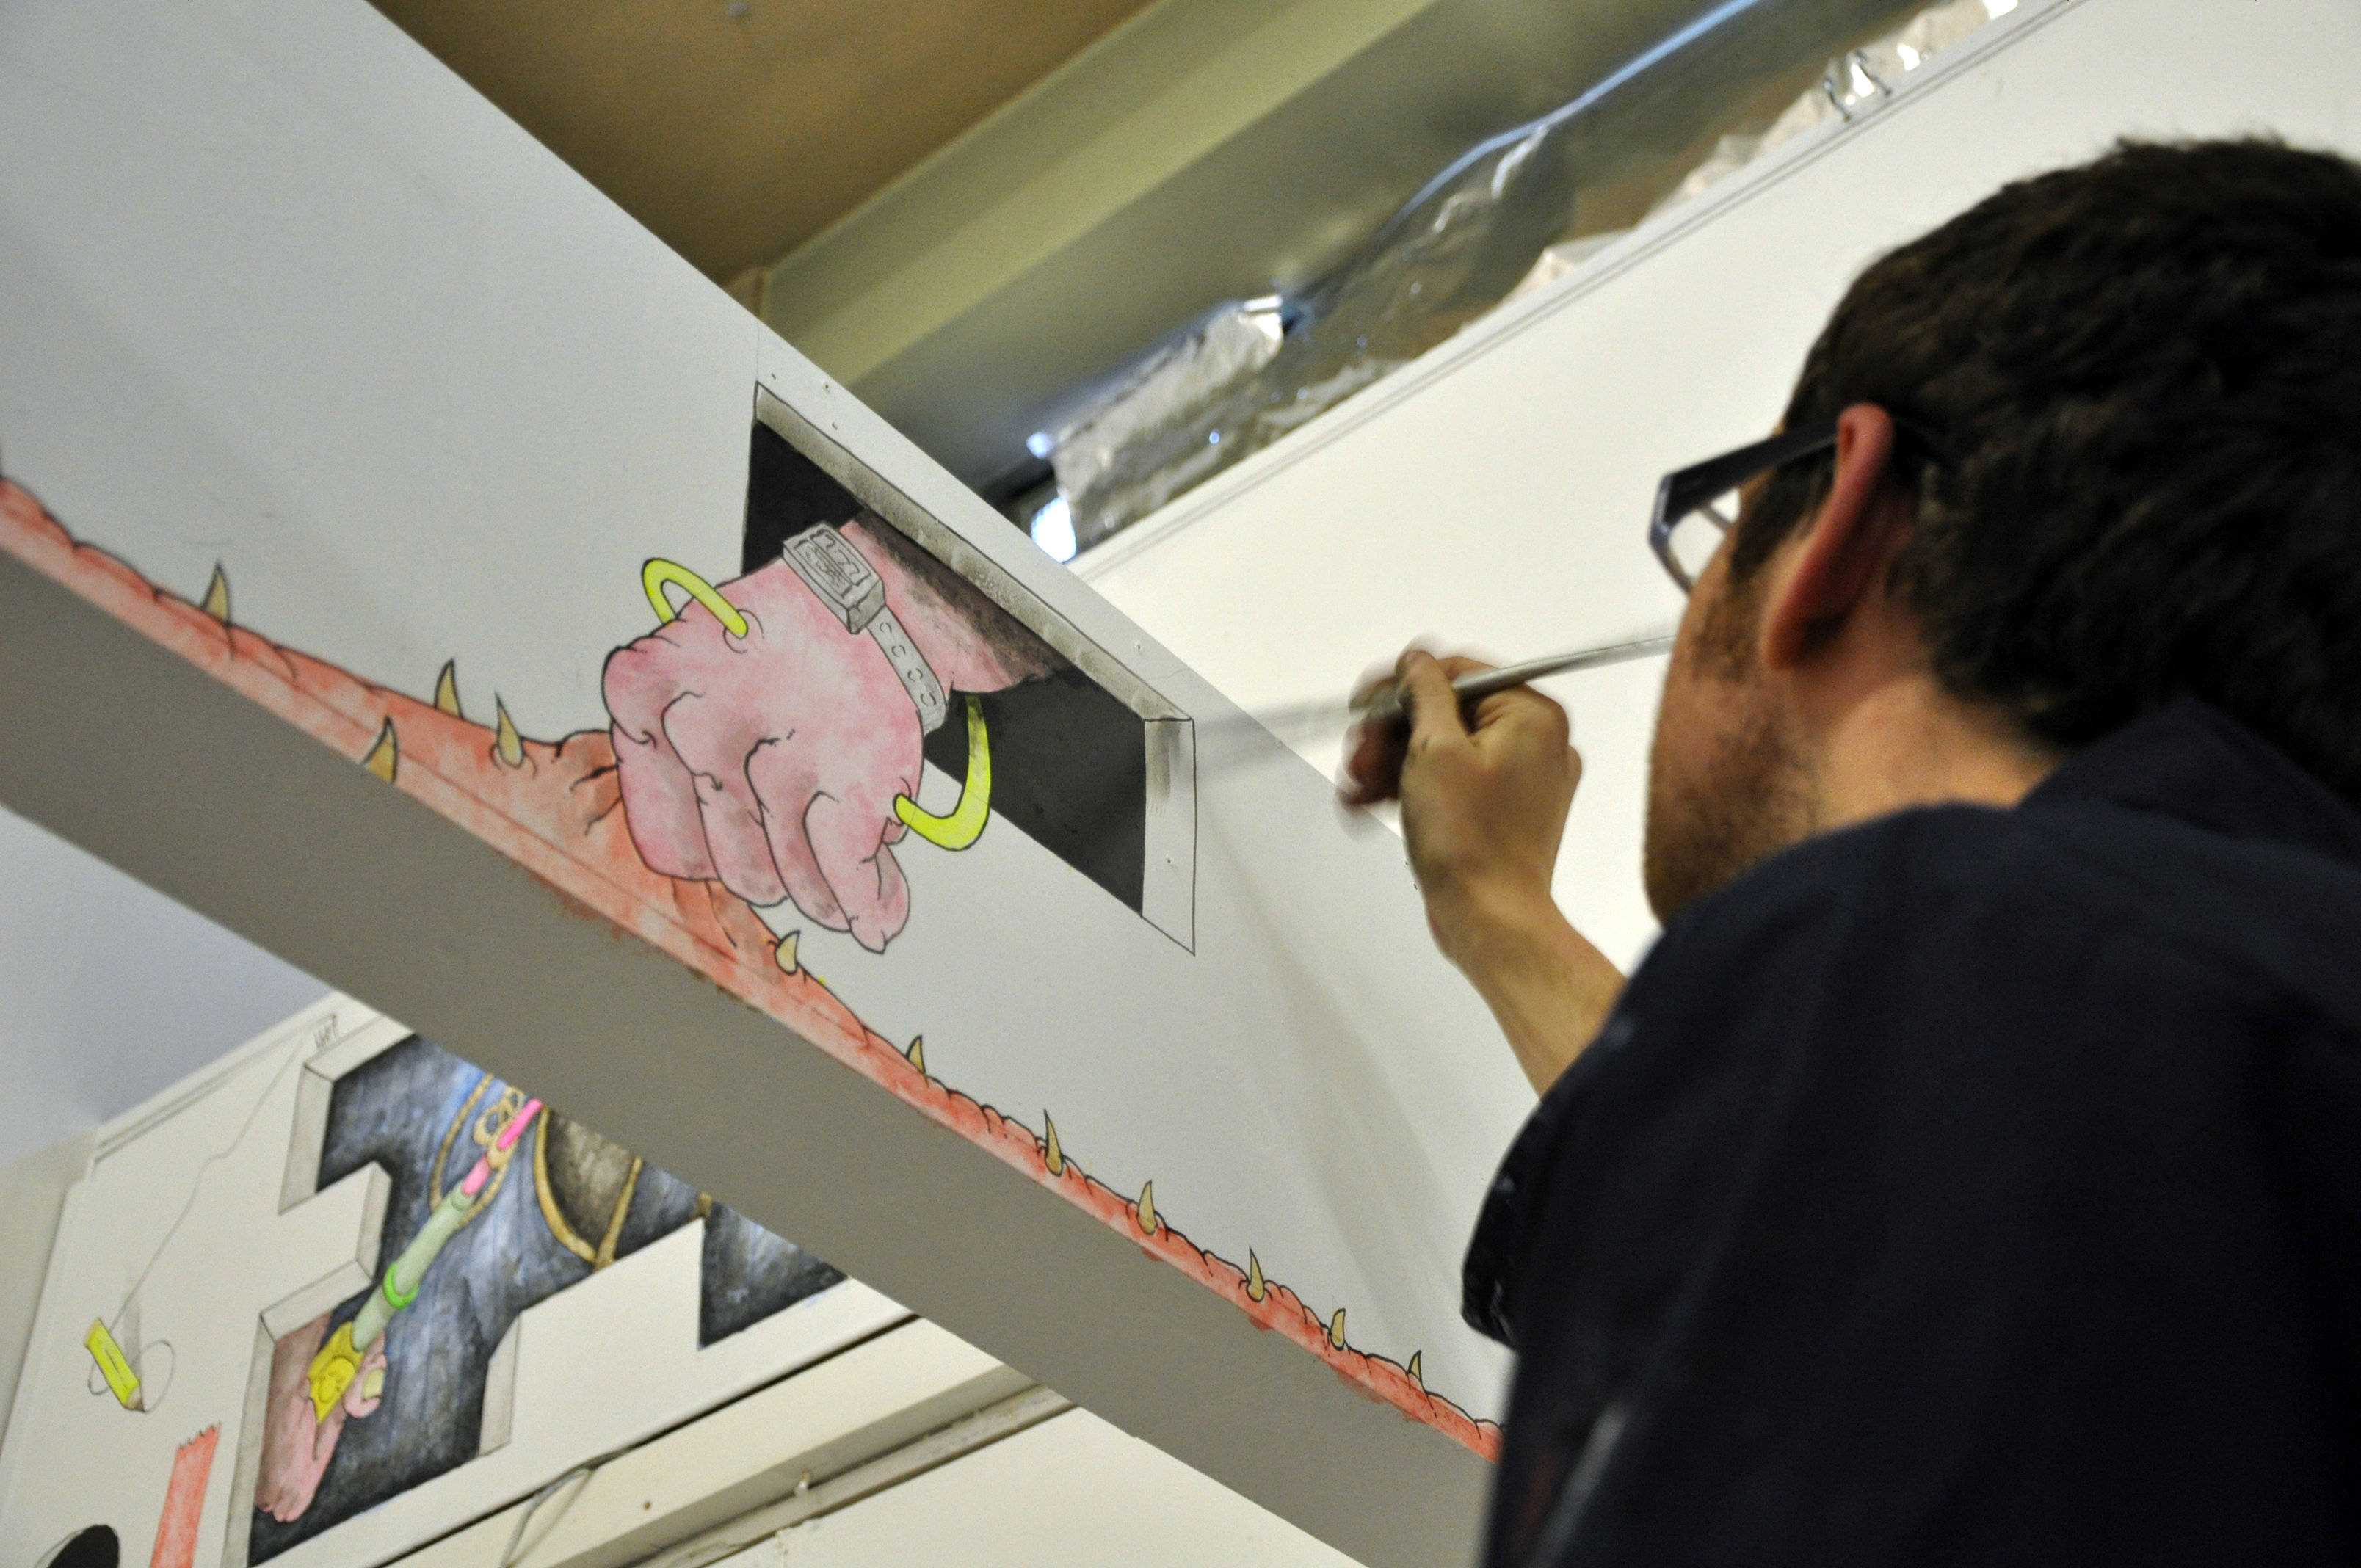 Paul at work doing wall mural for an exhibition